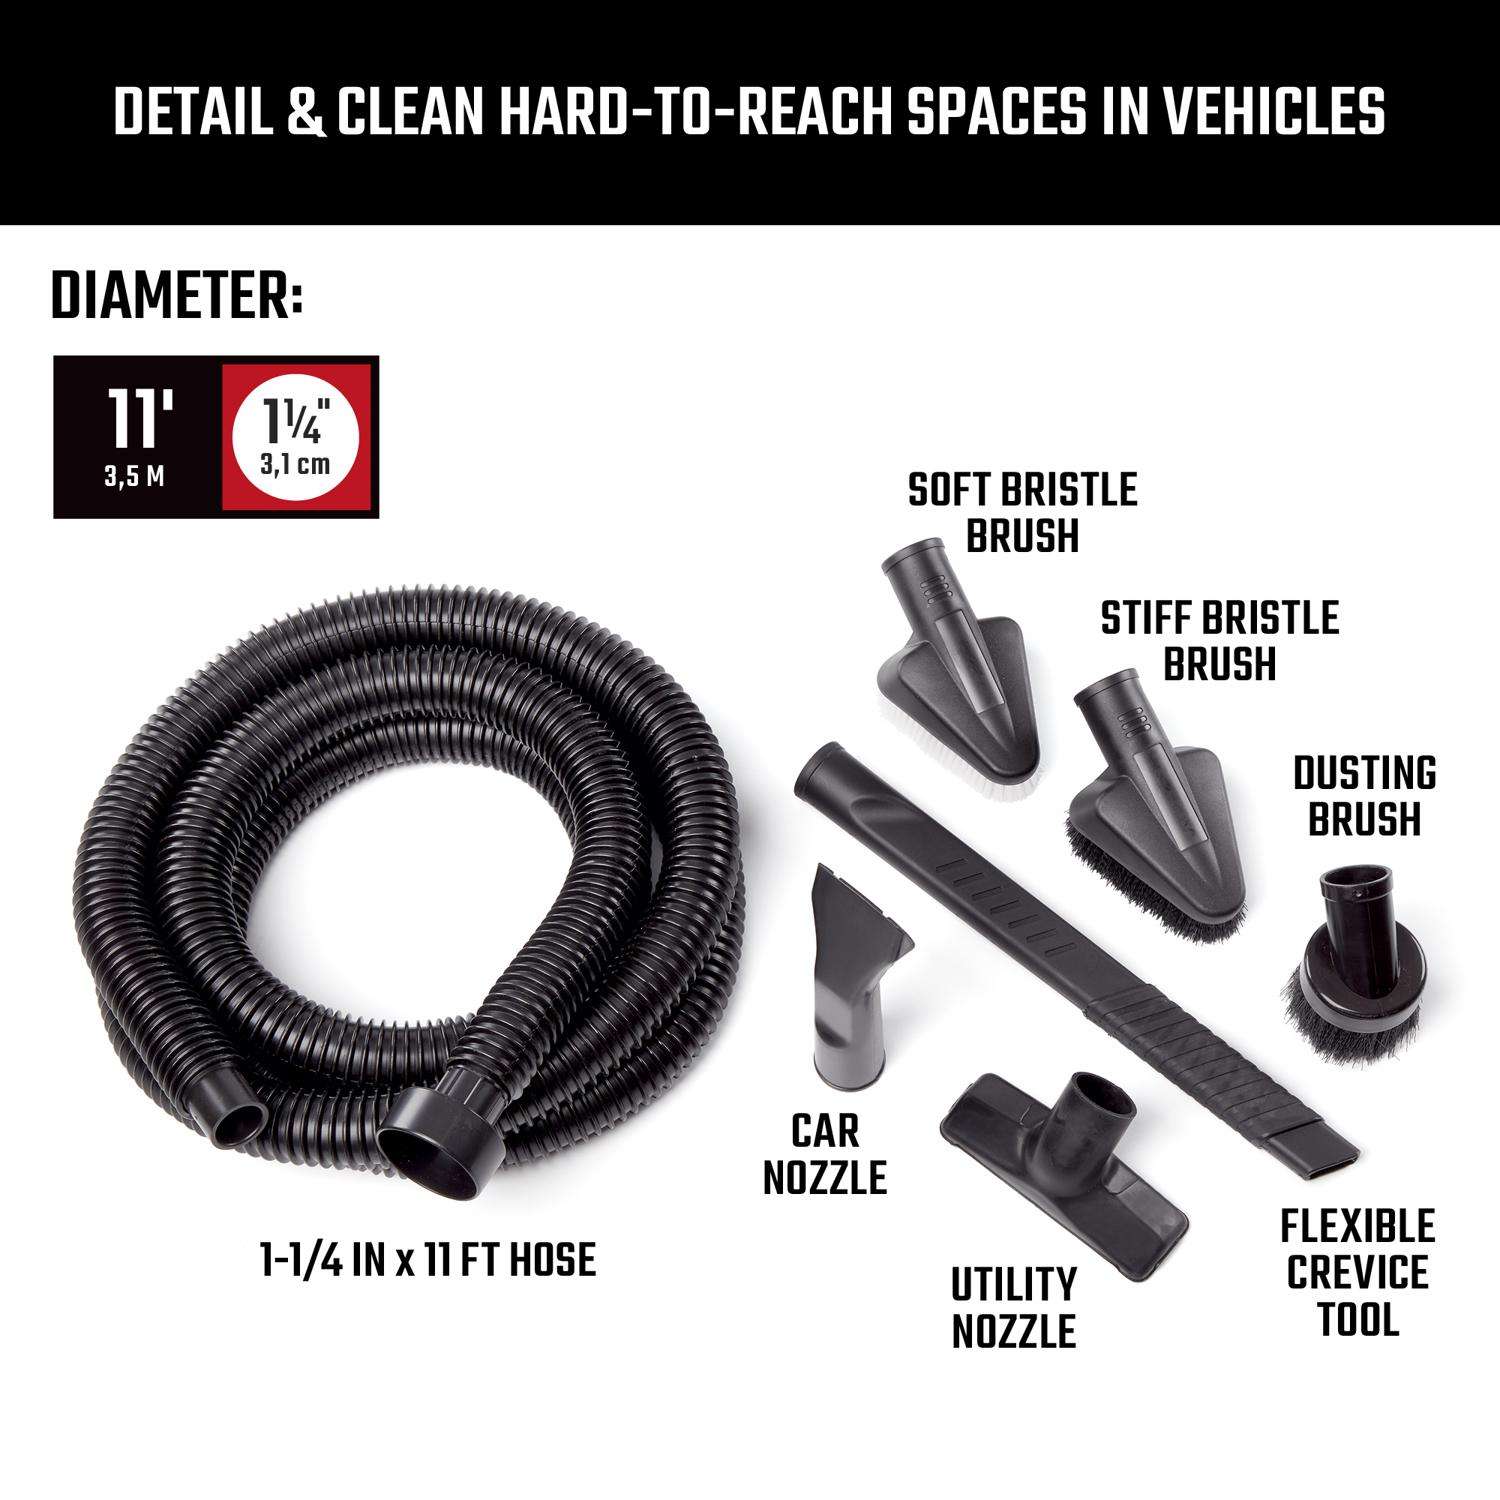 CRAFTSMAN CMXZVBE38662 1-1/4 in. 5-Piece Wet/Dry Vac Car Cleaning Kit, Automotive  Detailing Accessories for Shop Vacuums , Blac